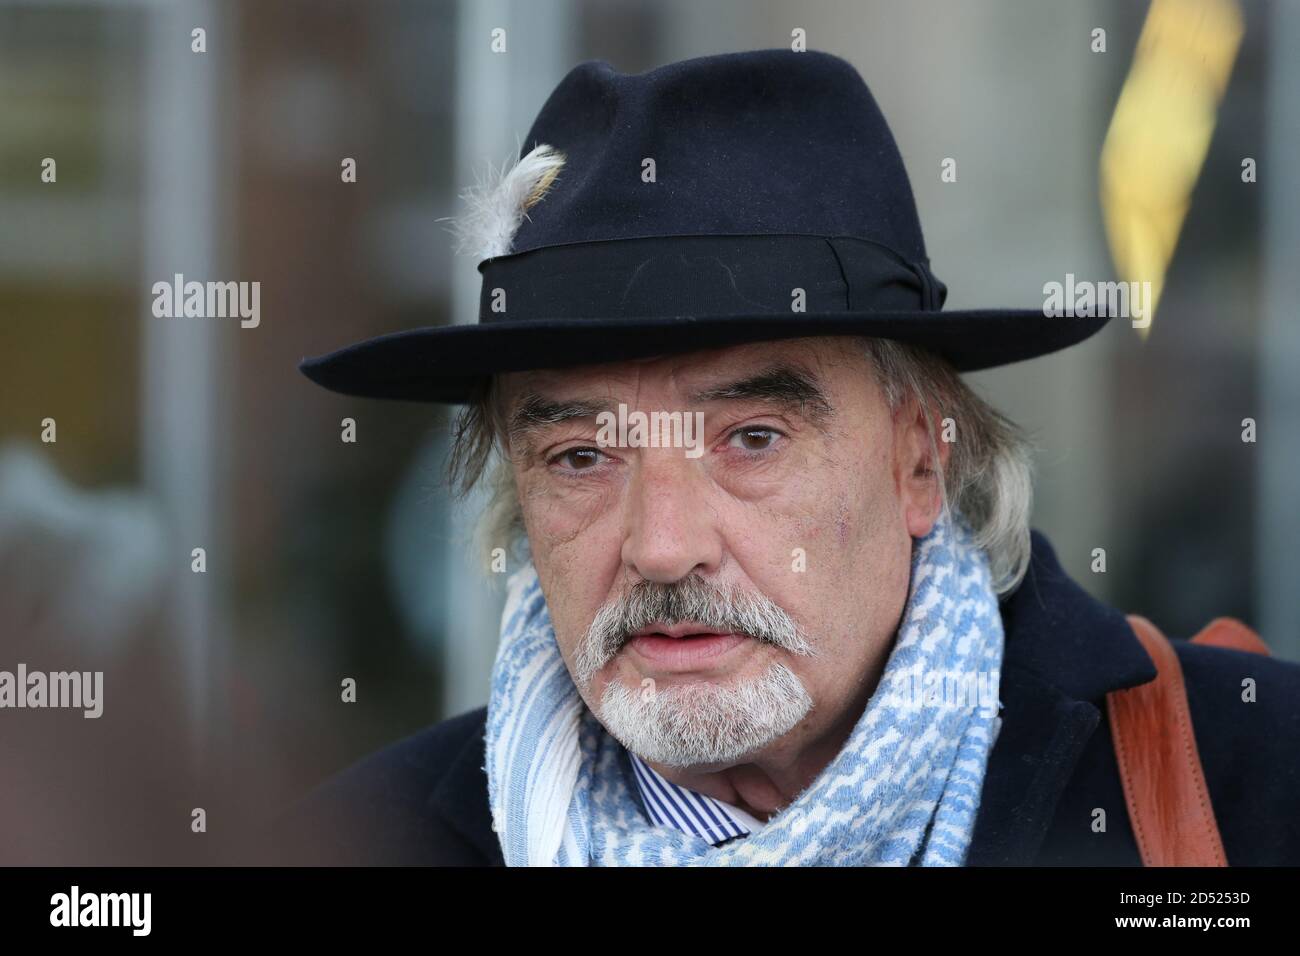 Dublin, Leinster, Ireland. 12/October/2020. Irish High Court refuses to extradite Ian Bailey to France for the murder of French citizen Sophie Toscan du Plantier in Ireland in 1996. Photo shows Ian Bailey outside the court after the decision. Mr Bailey has already been found guilty of the murder, in his absence, by a French Court. Mr Bailey has alway denied the murder. Photo: Sasko Lazarov/RollingNews.ie Credit: RollingNews.ie/Alamy Live News Stock Photo